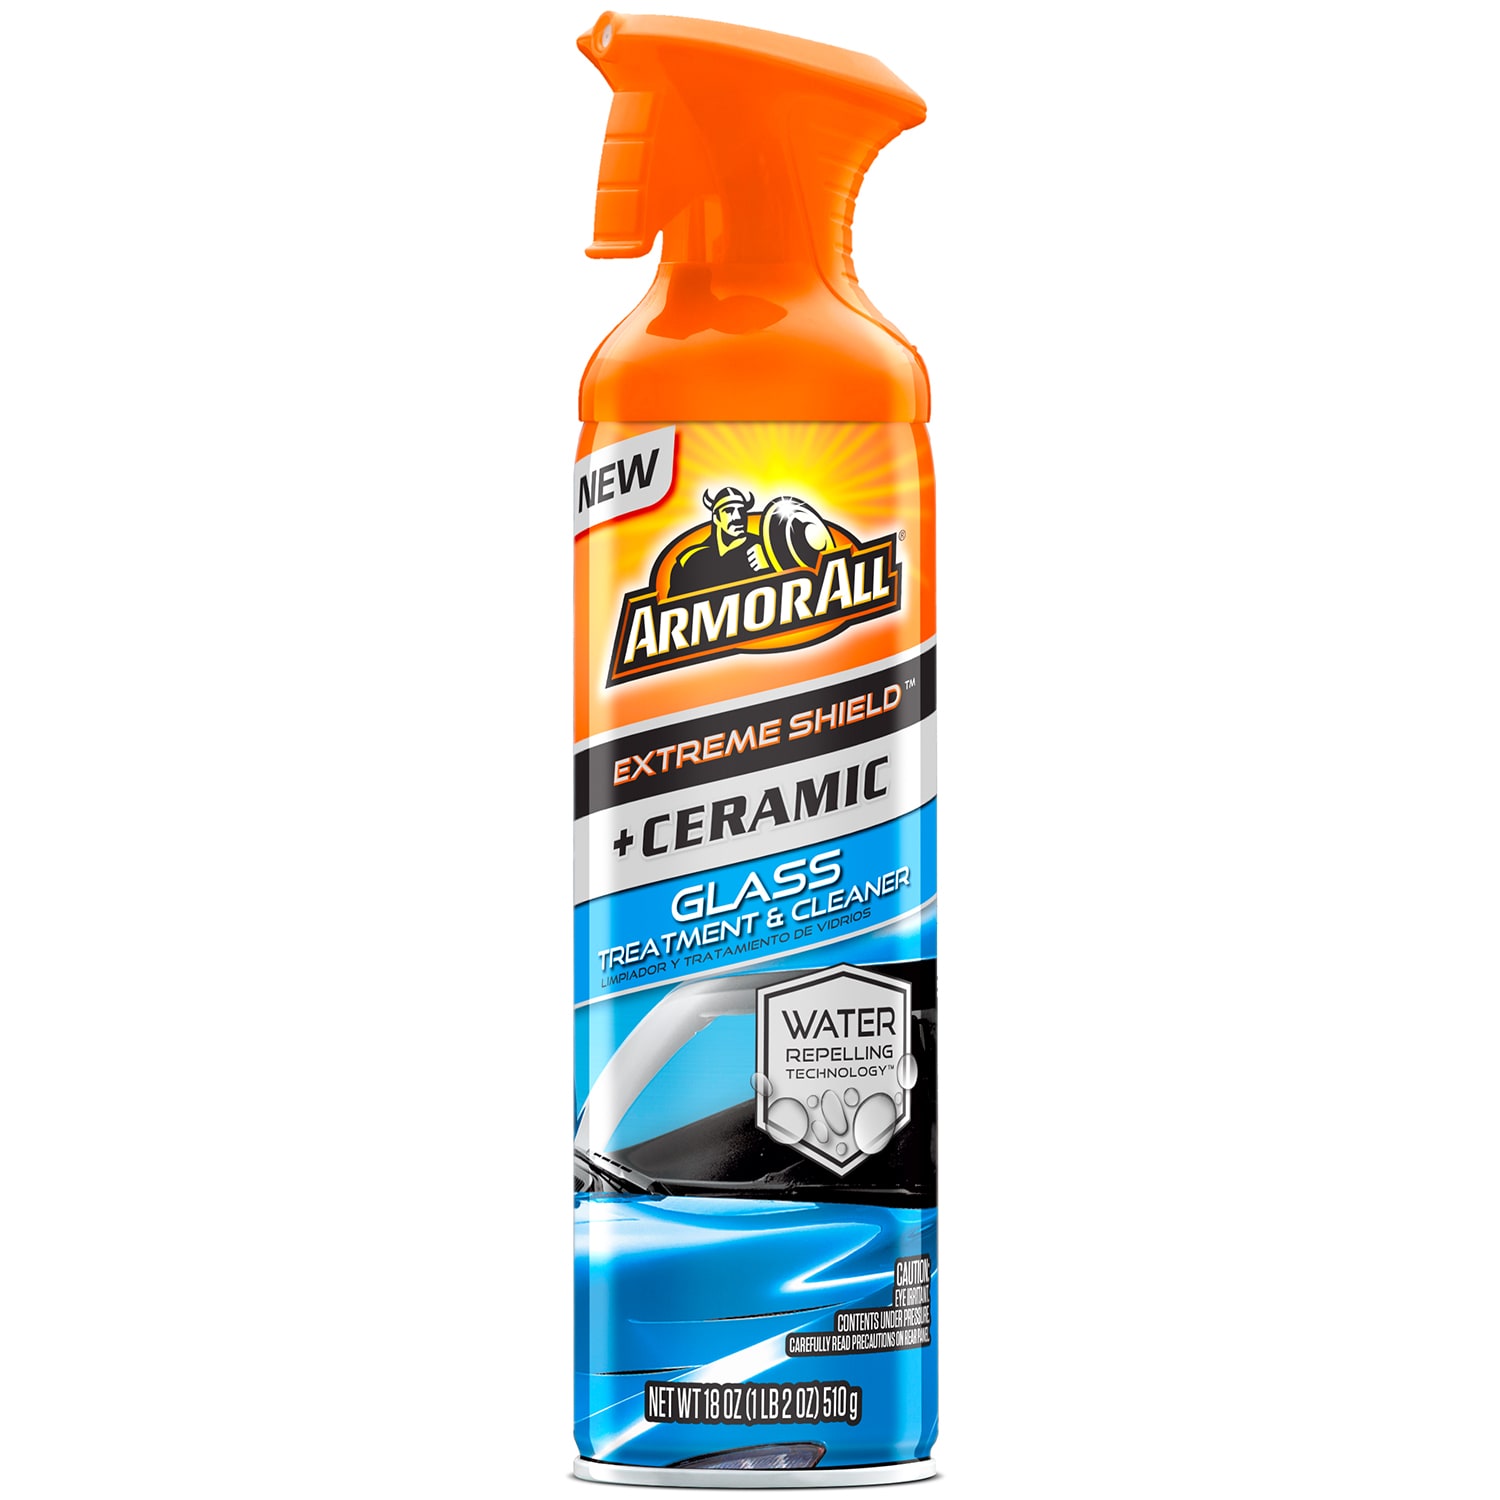 Armor All Extreme Shield Ceramic Glass Treatment & Cleaner (18 oz)